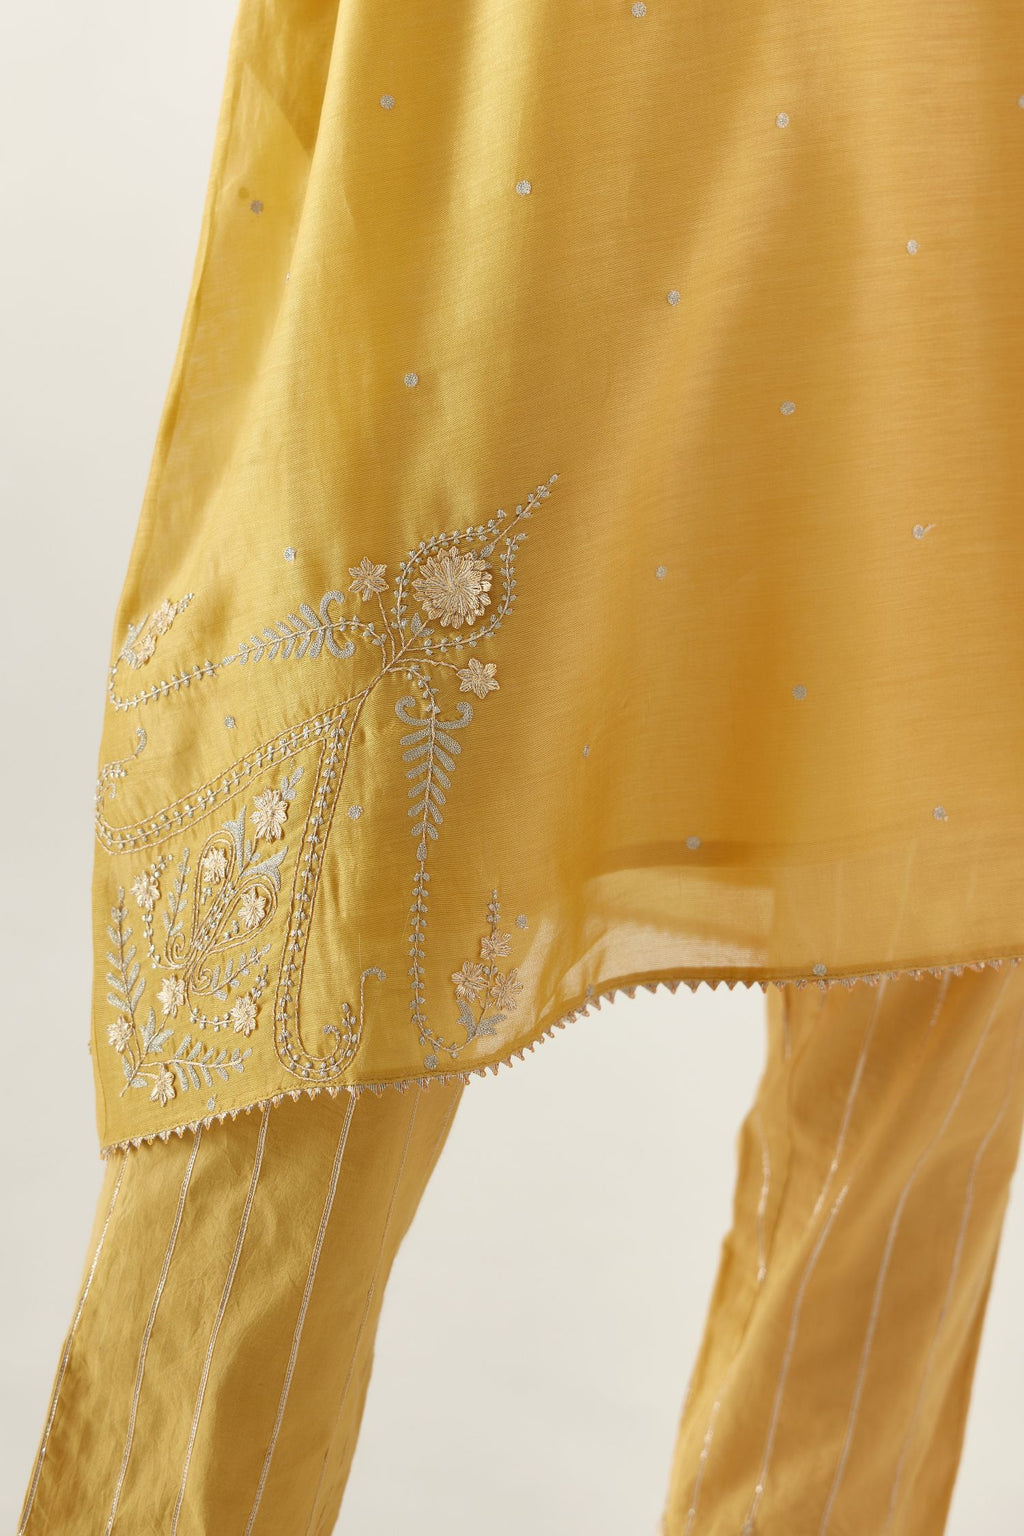 Yellow silk chanderi A-line kurta set, highlighted with gold gota flowers and zari embroidery